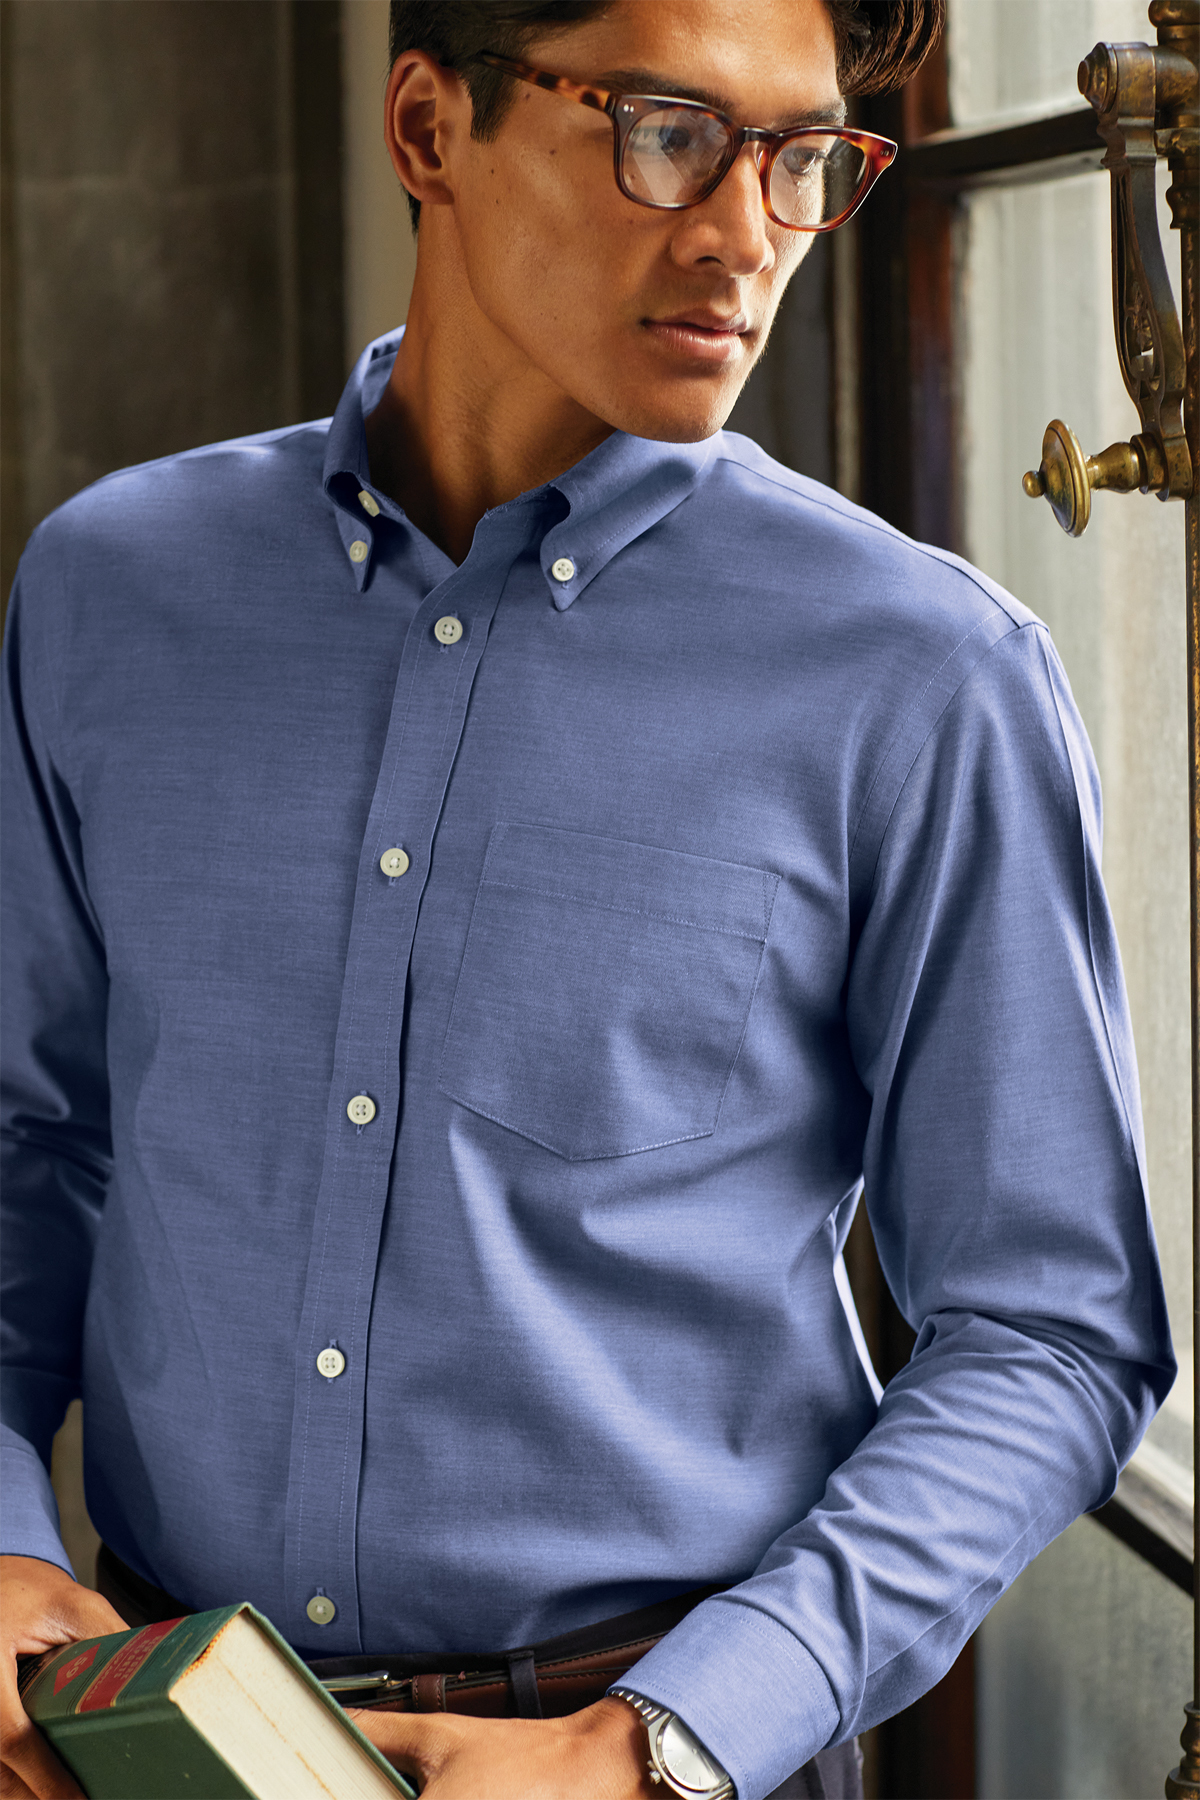 Brooks Brothers Wrinkle-Free Stretch Patterned Shirt, Product